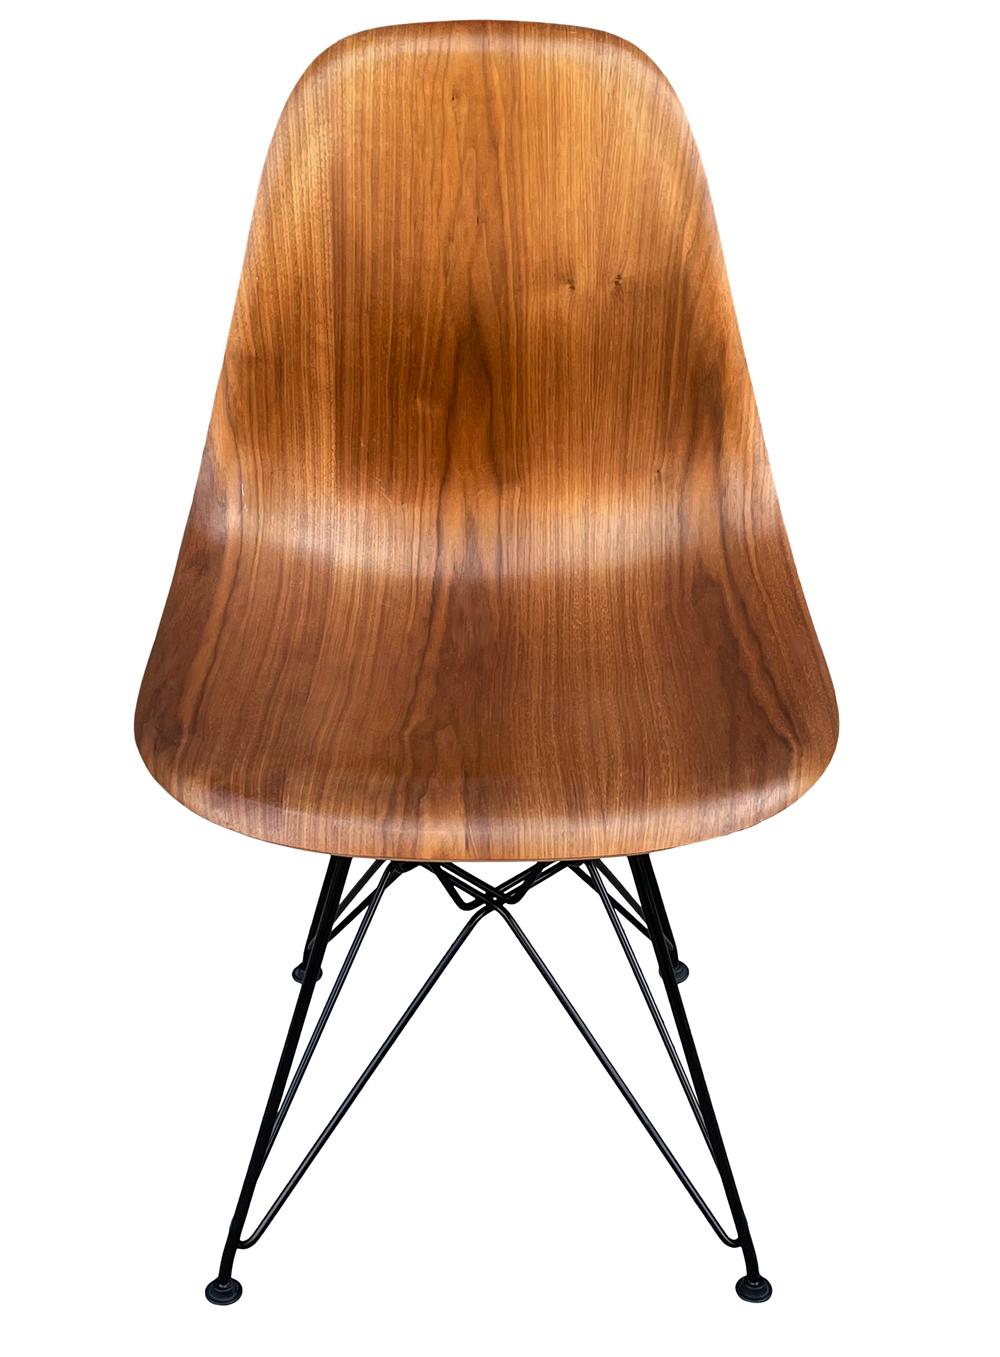 Contemporary Set of 8 Mid-Century Modern Walnut Wood Shell Dining Chairs by Charles Eames For Sale